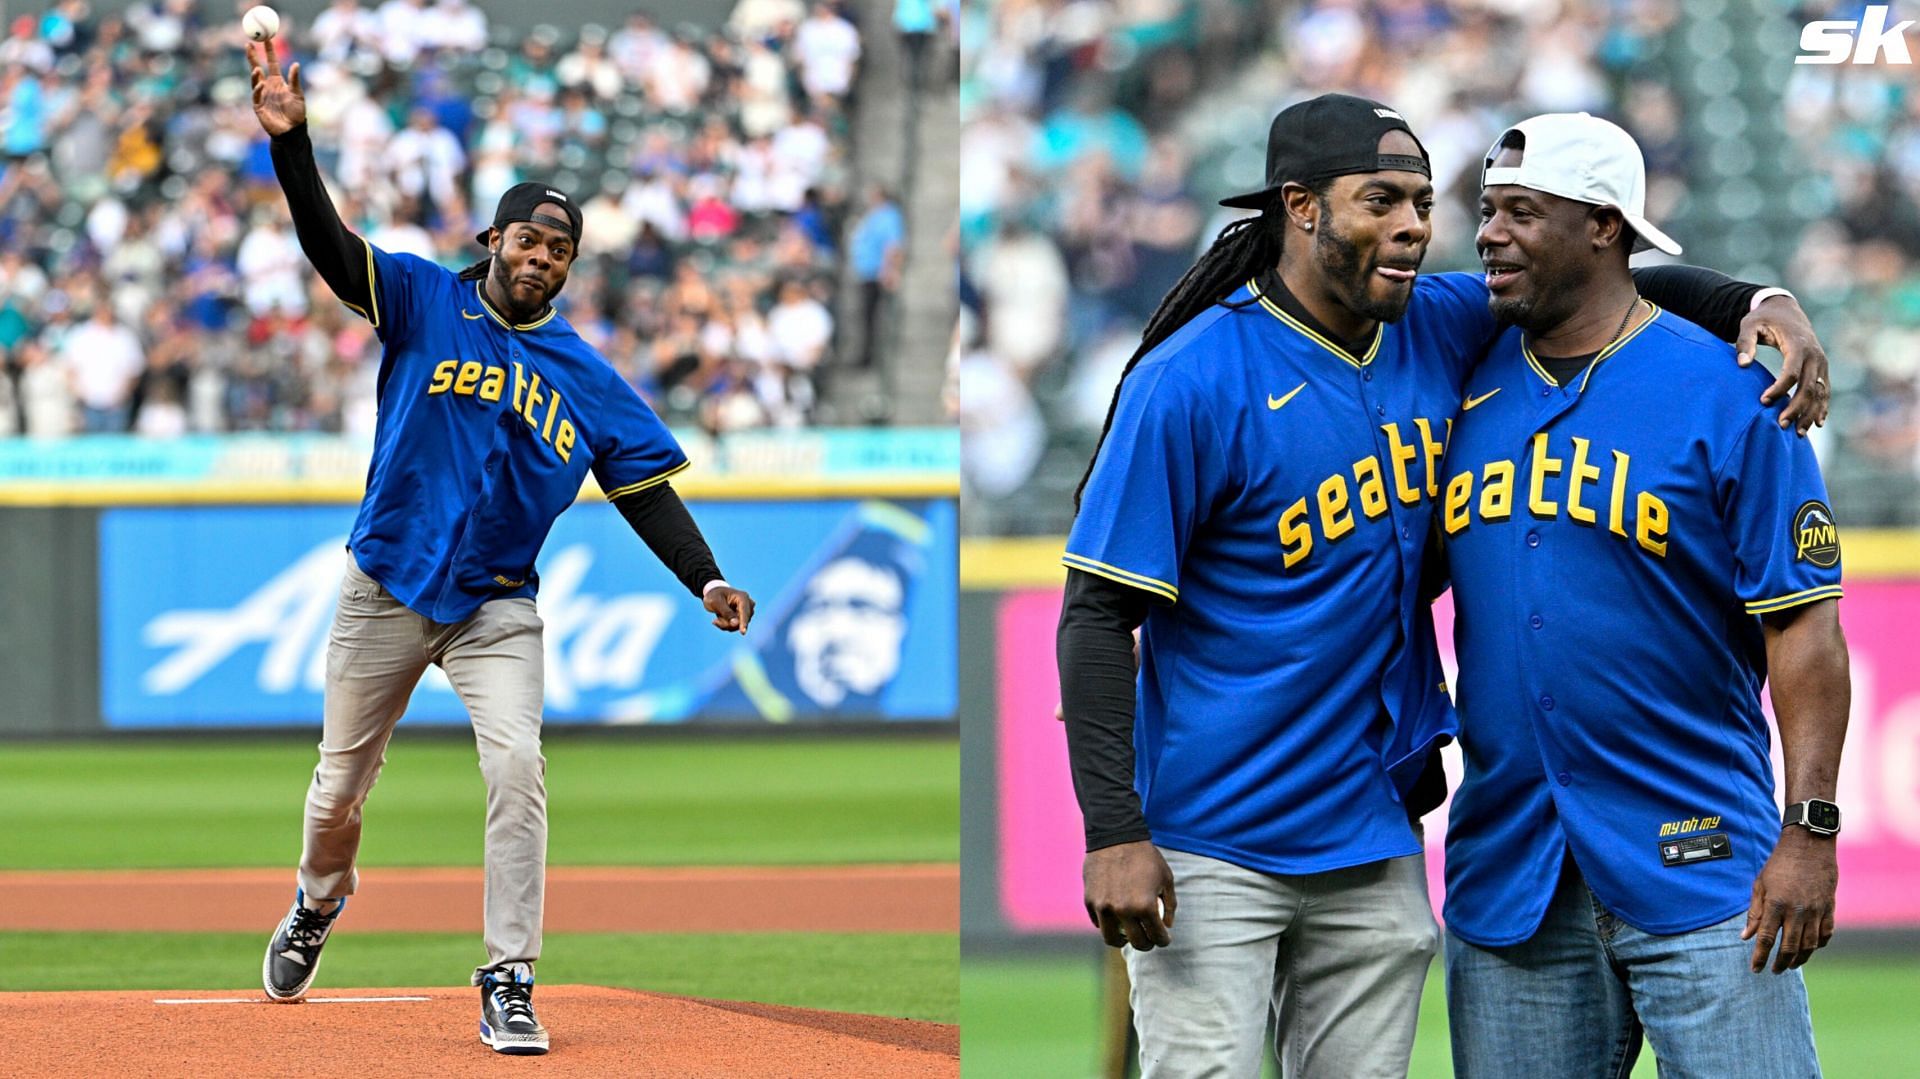 Richard Sherman and Ken Griffey Jr. ahead of Seattle Mariners game on Friday